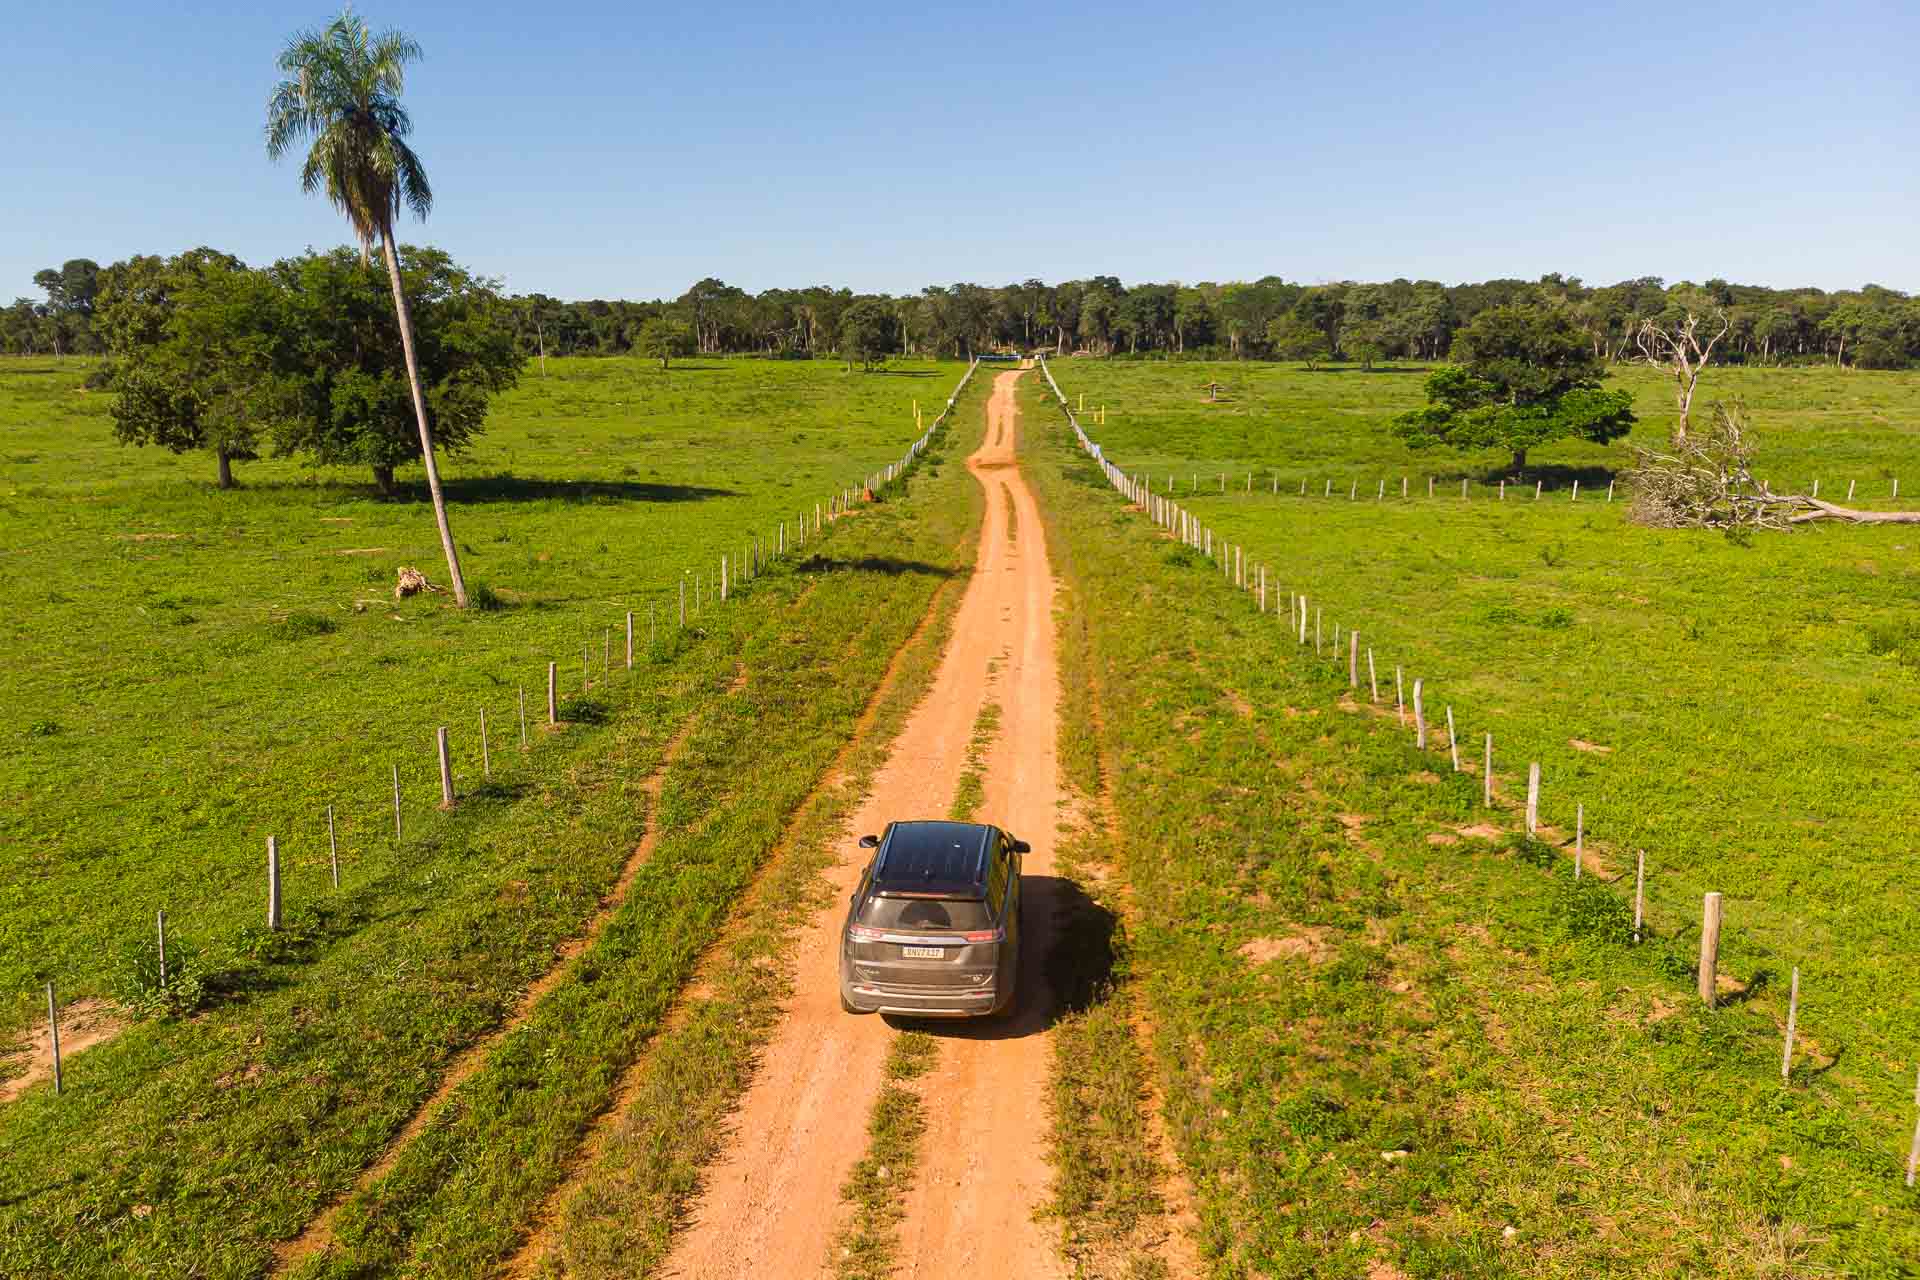 A car on a dirty road surrounded by a plain ground on a open sky